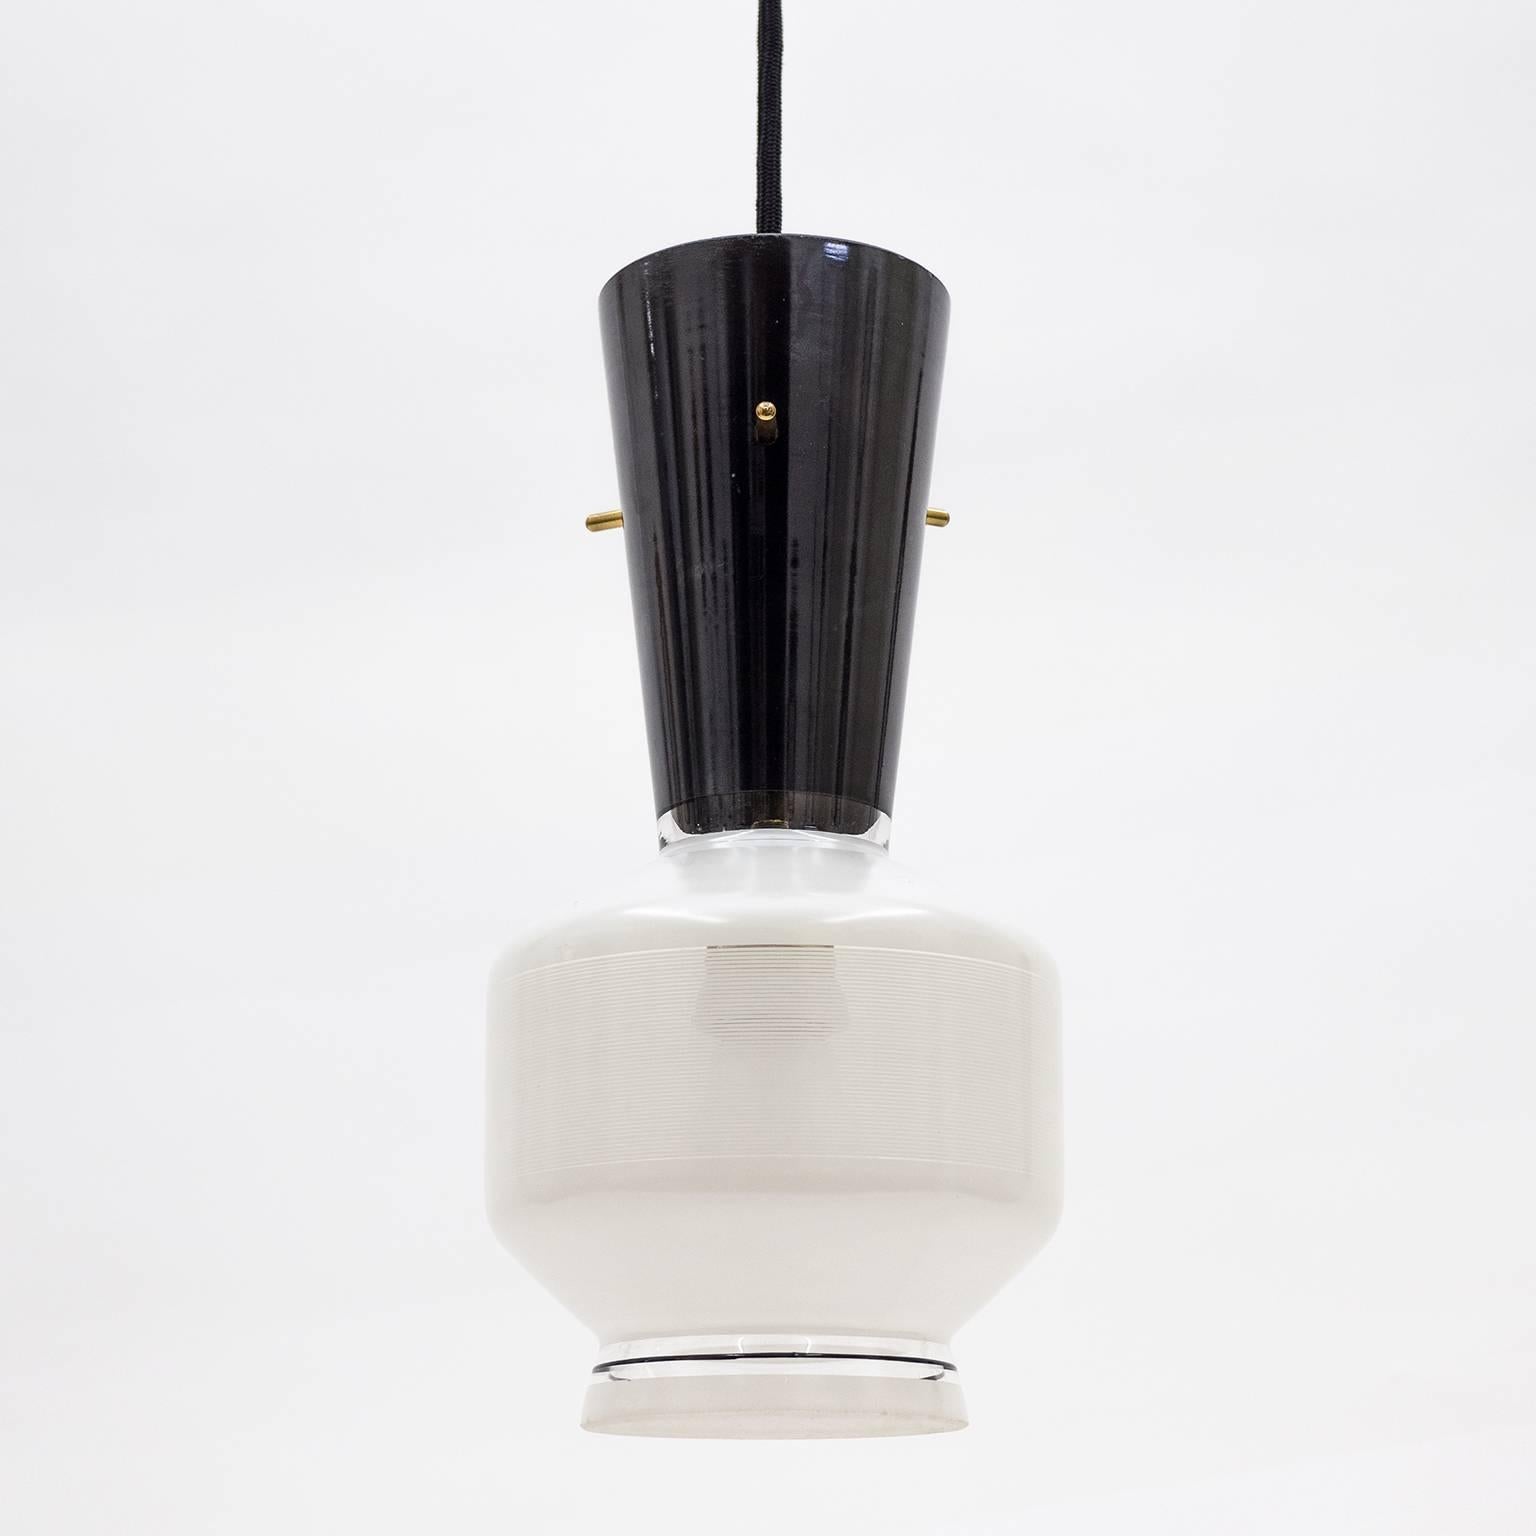 Graphical pair of Italian black and white enameled glass pendants from the 1950s. The clear blown glass bodies have a lovely midcentury shape and are enameled in black and white - partially in very fine pinstripe lines to create a semi-translucent